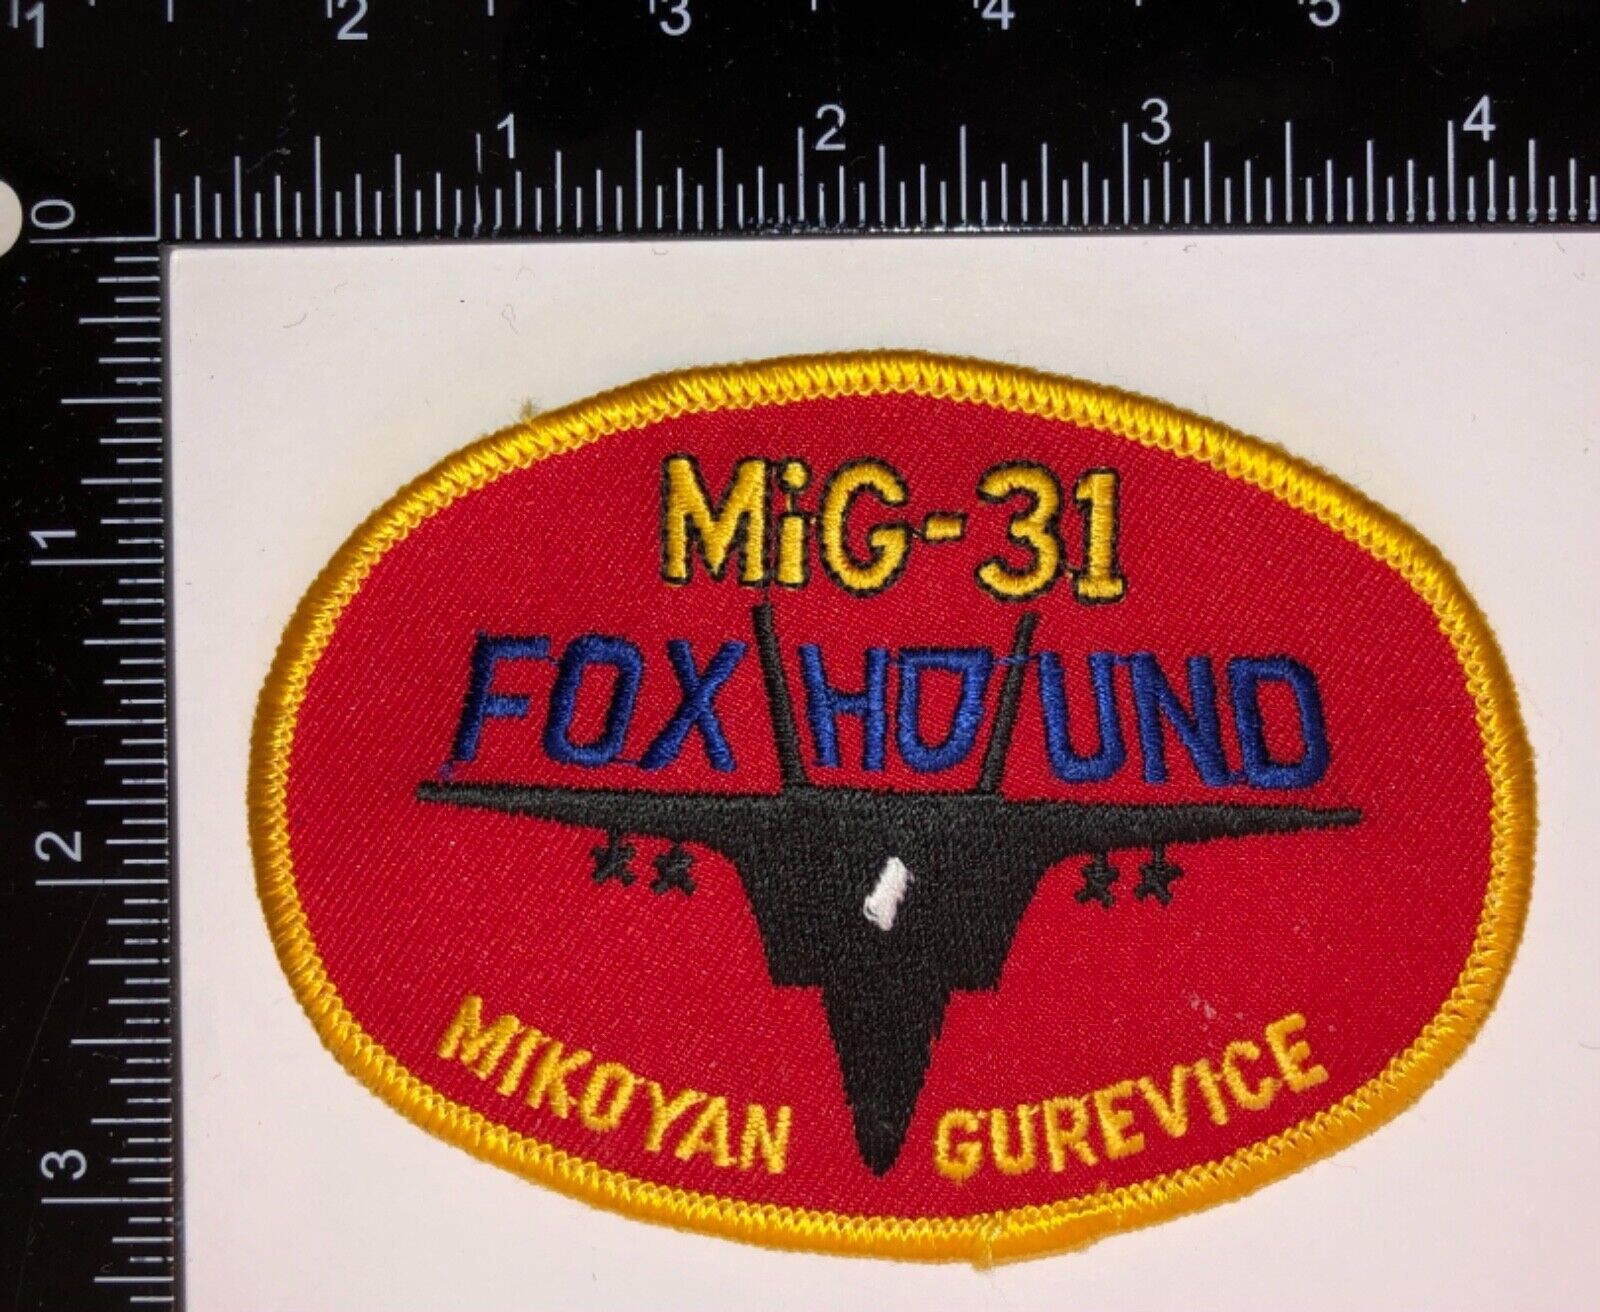 USAF US Air Force Mig 31 Foxhound Aggressors Squadron Patch